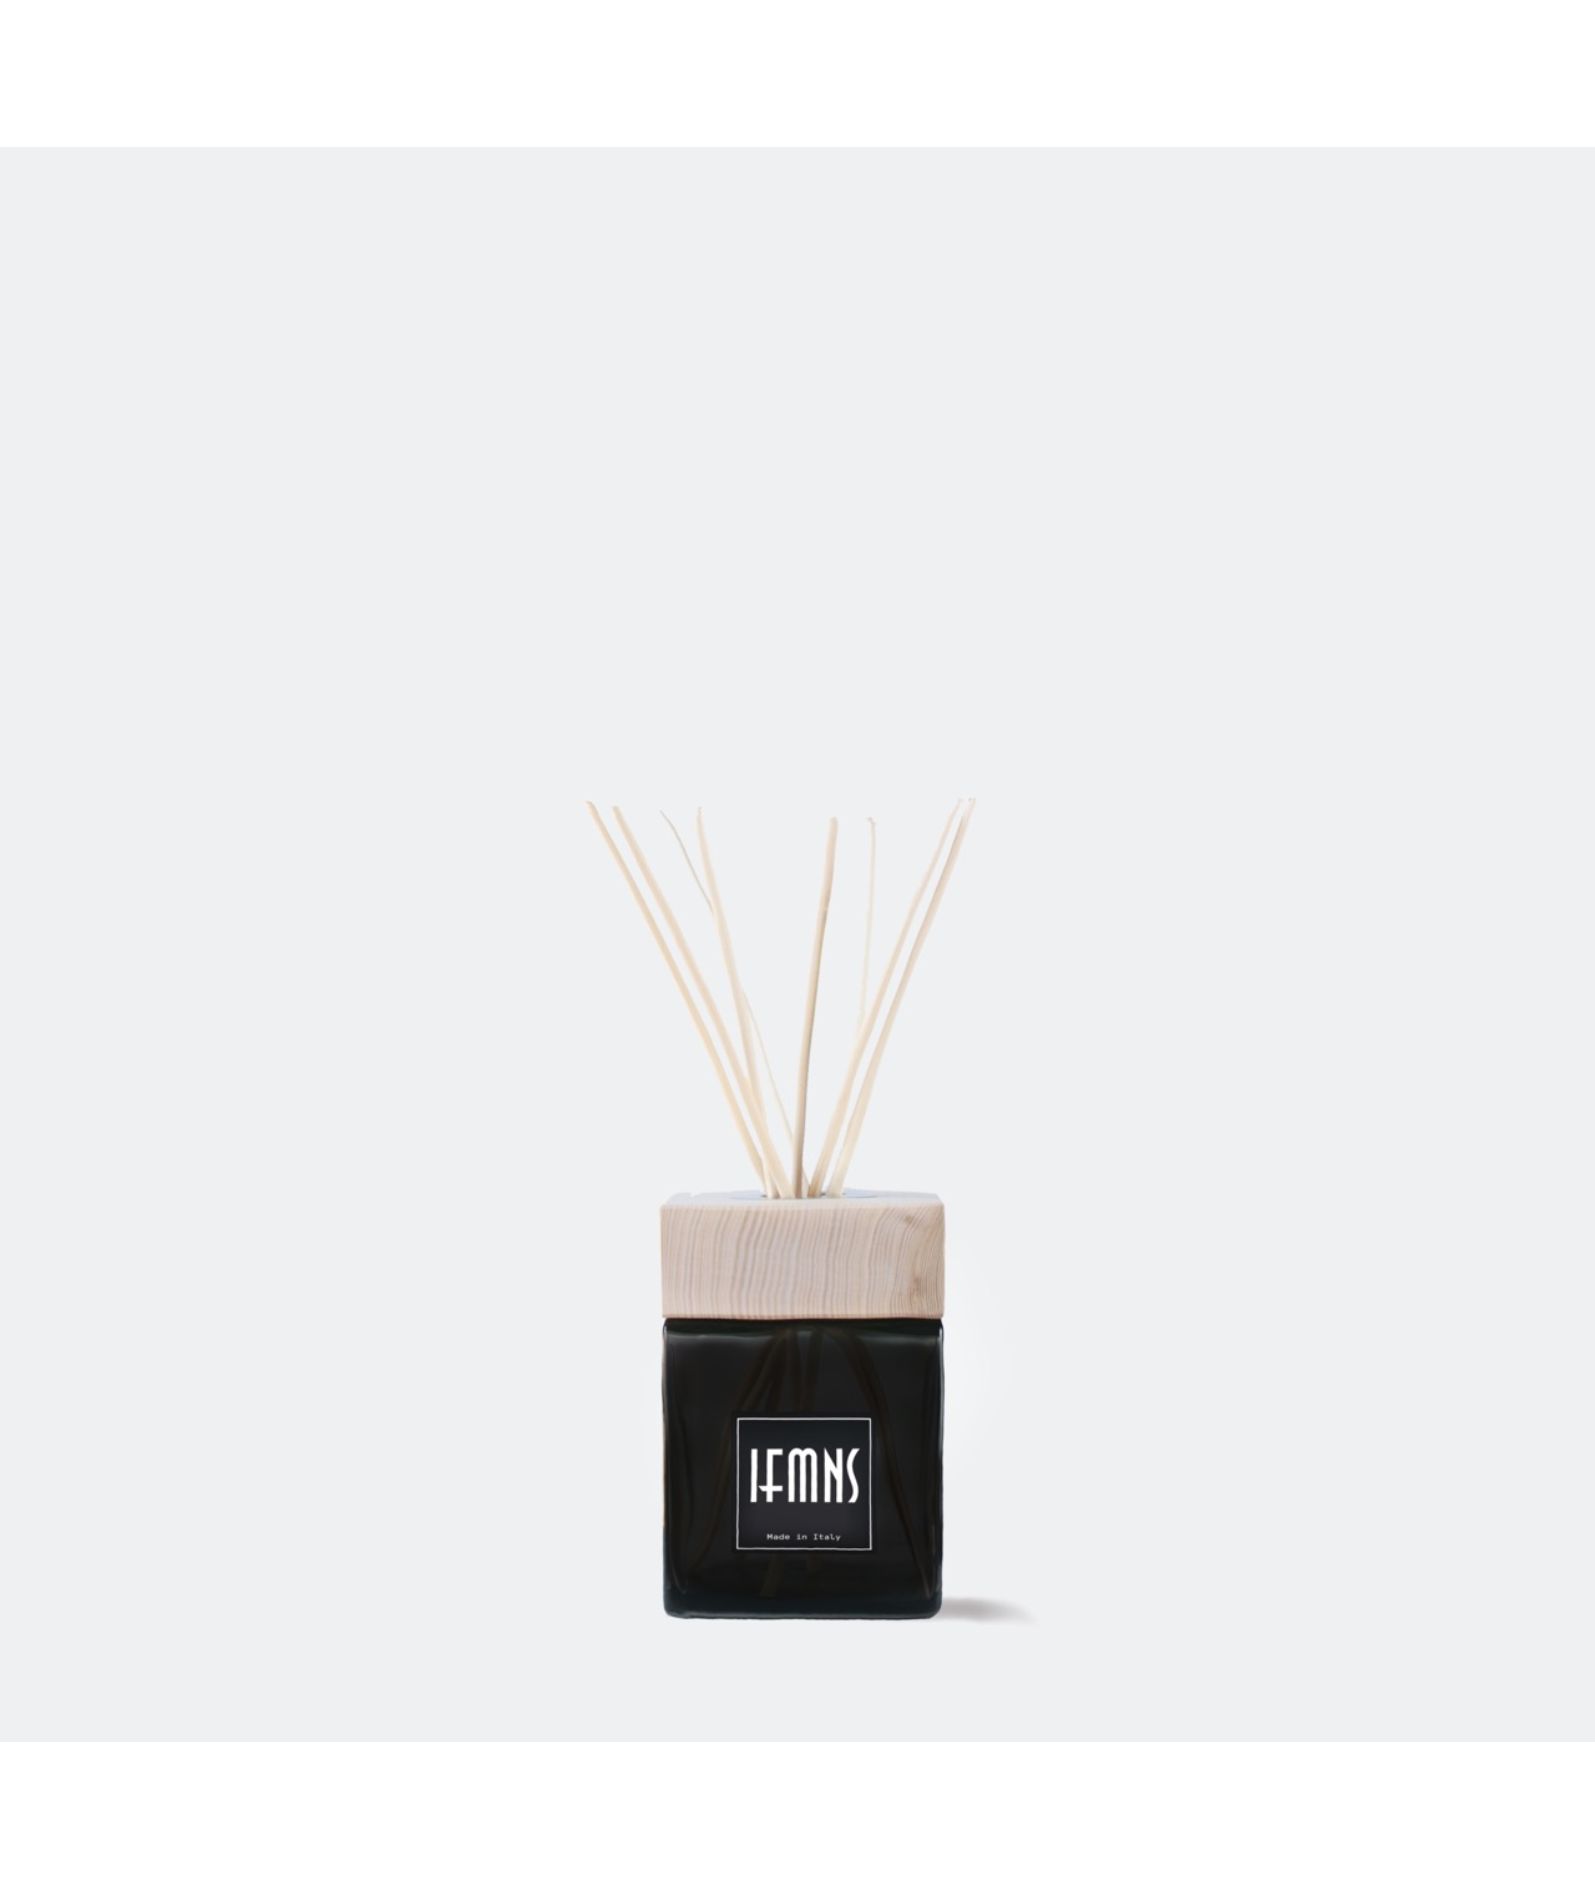 Shop Home Fragrance Oud 200ml Online - IFMNS